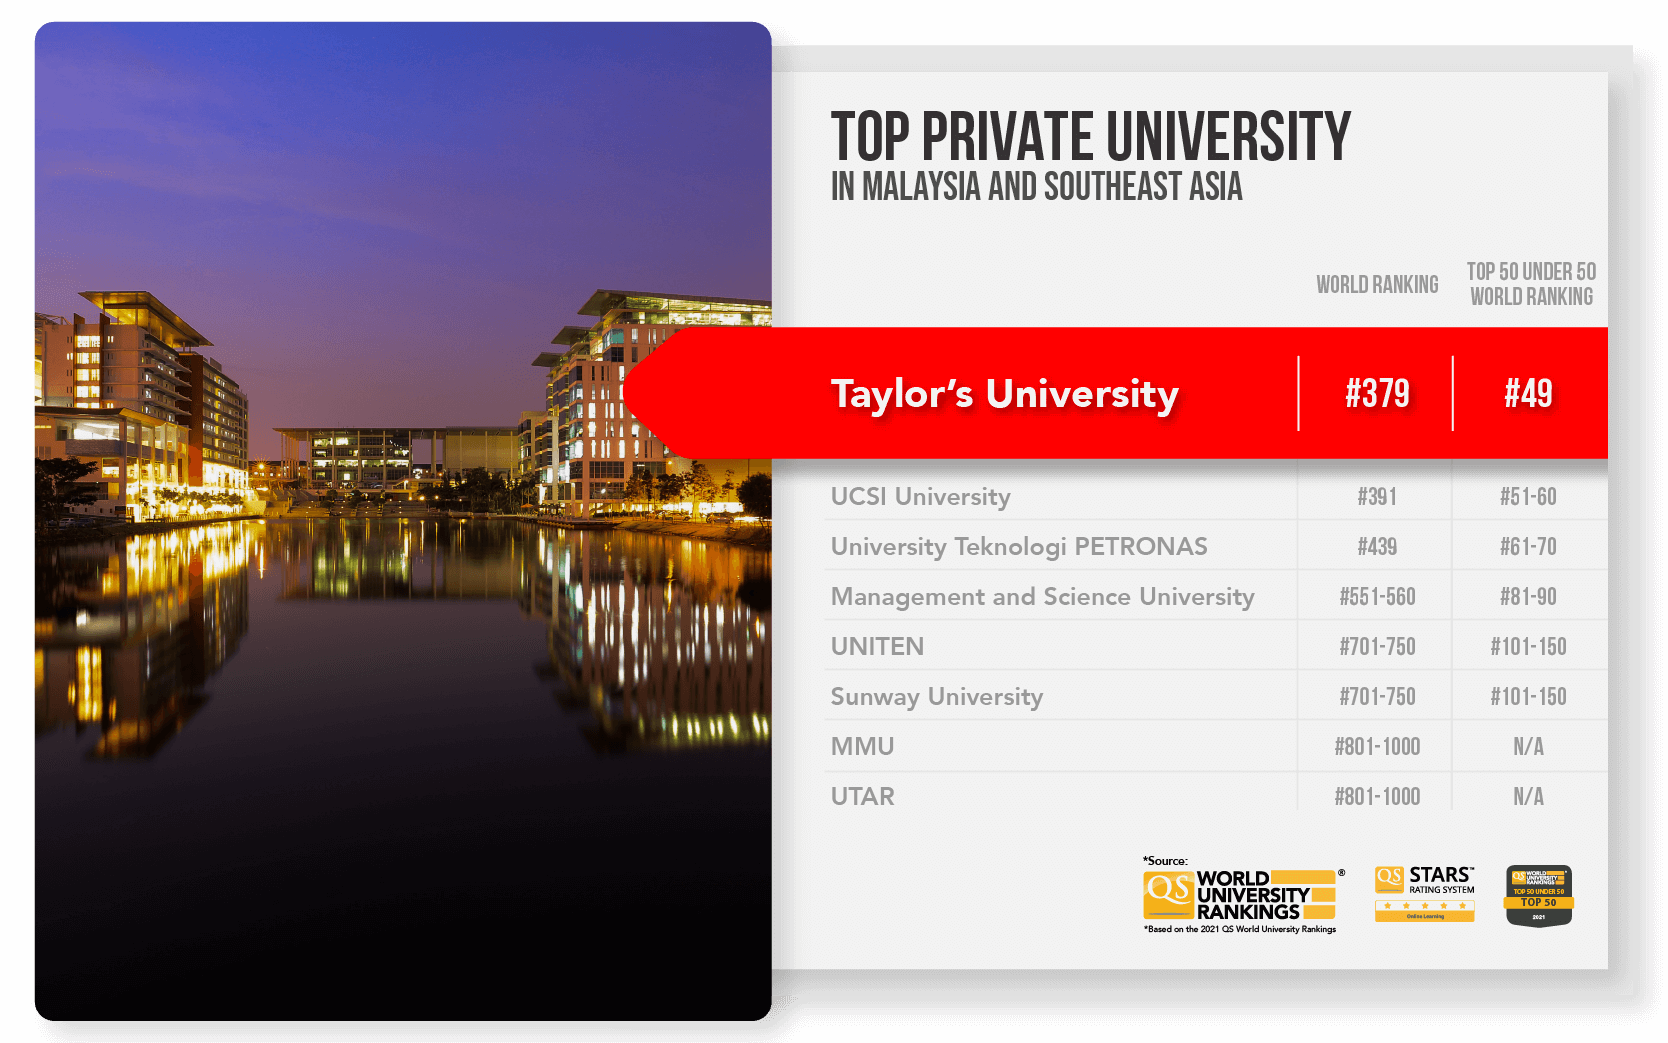 Taylor's University ranking as a top private university in Malaysia.